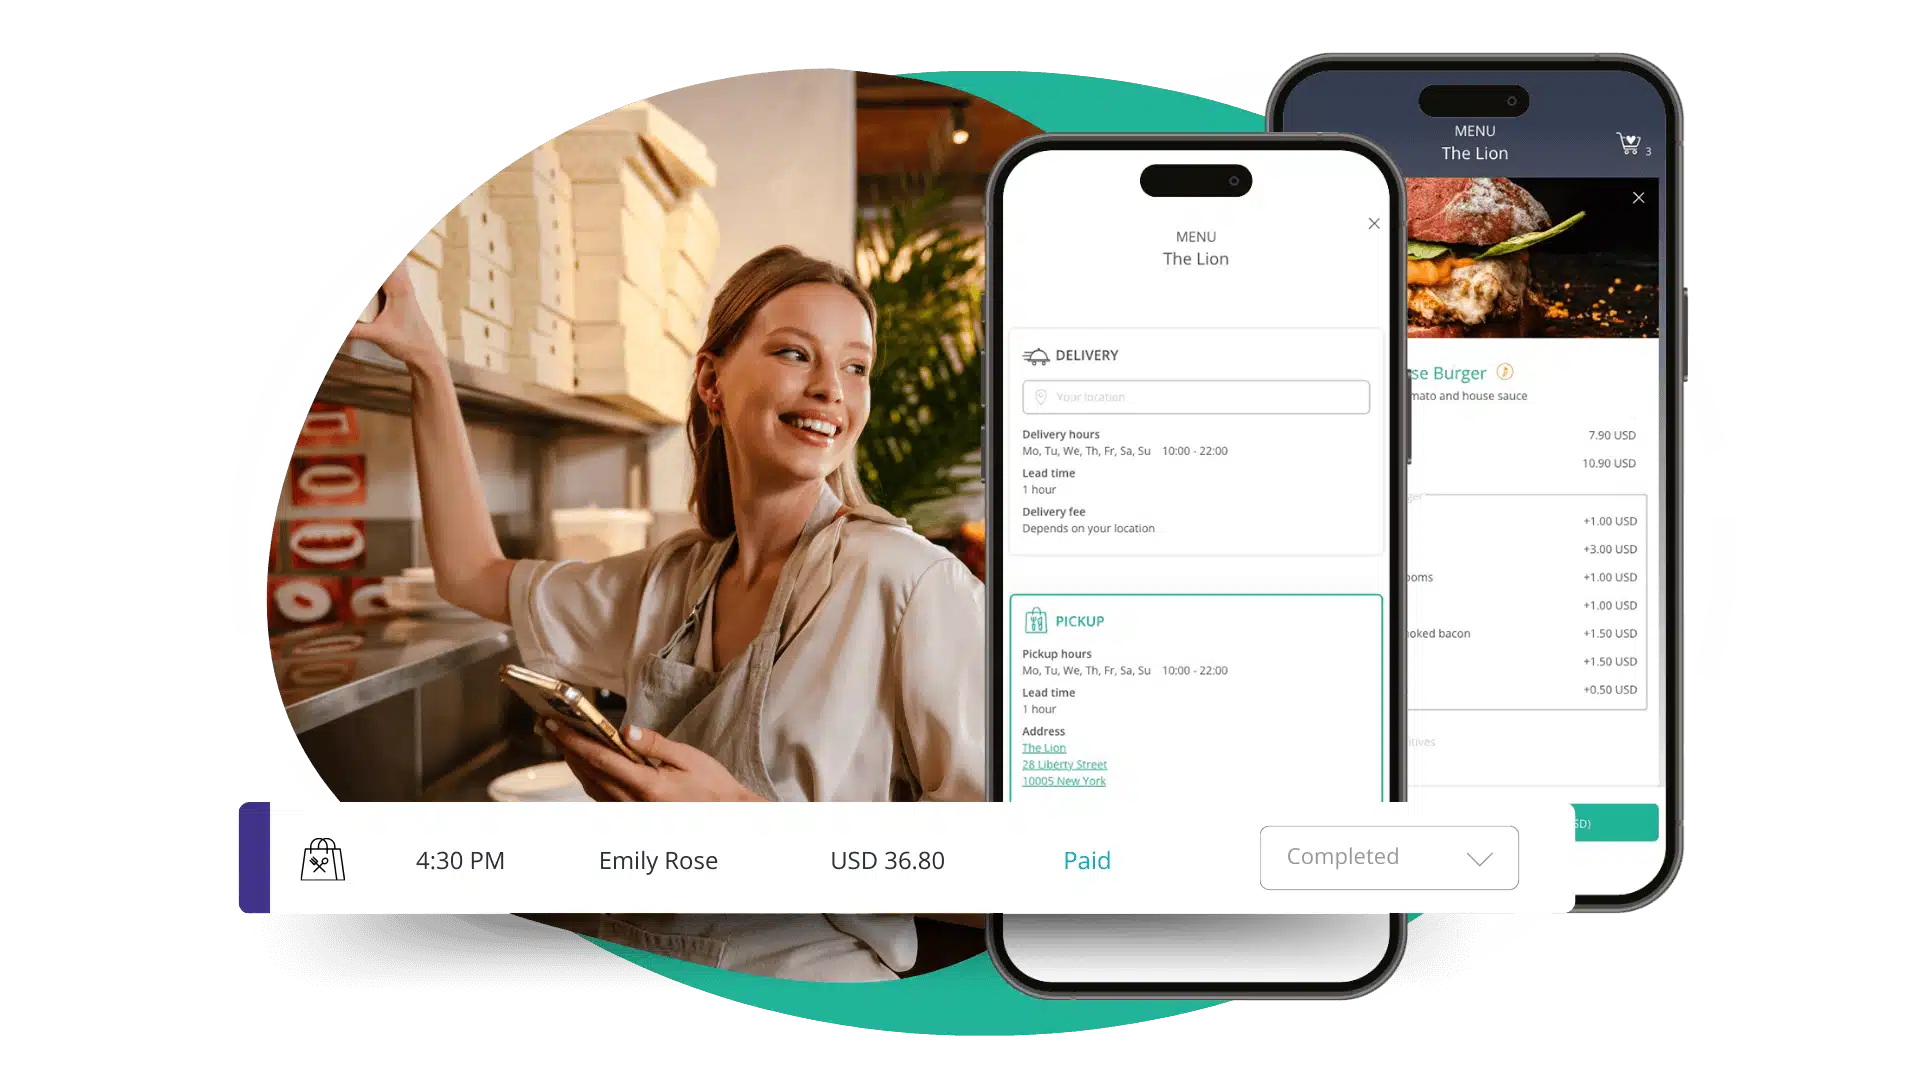 Online Ordering System for Restaurants and Delivery Services